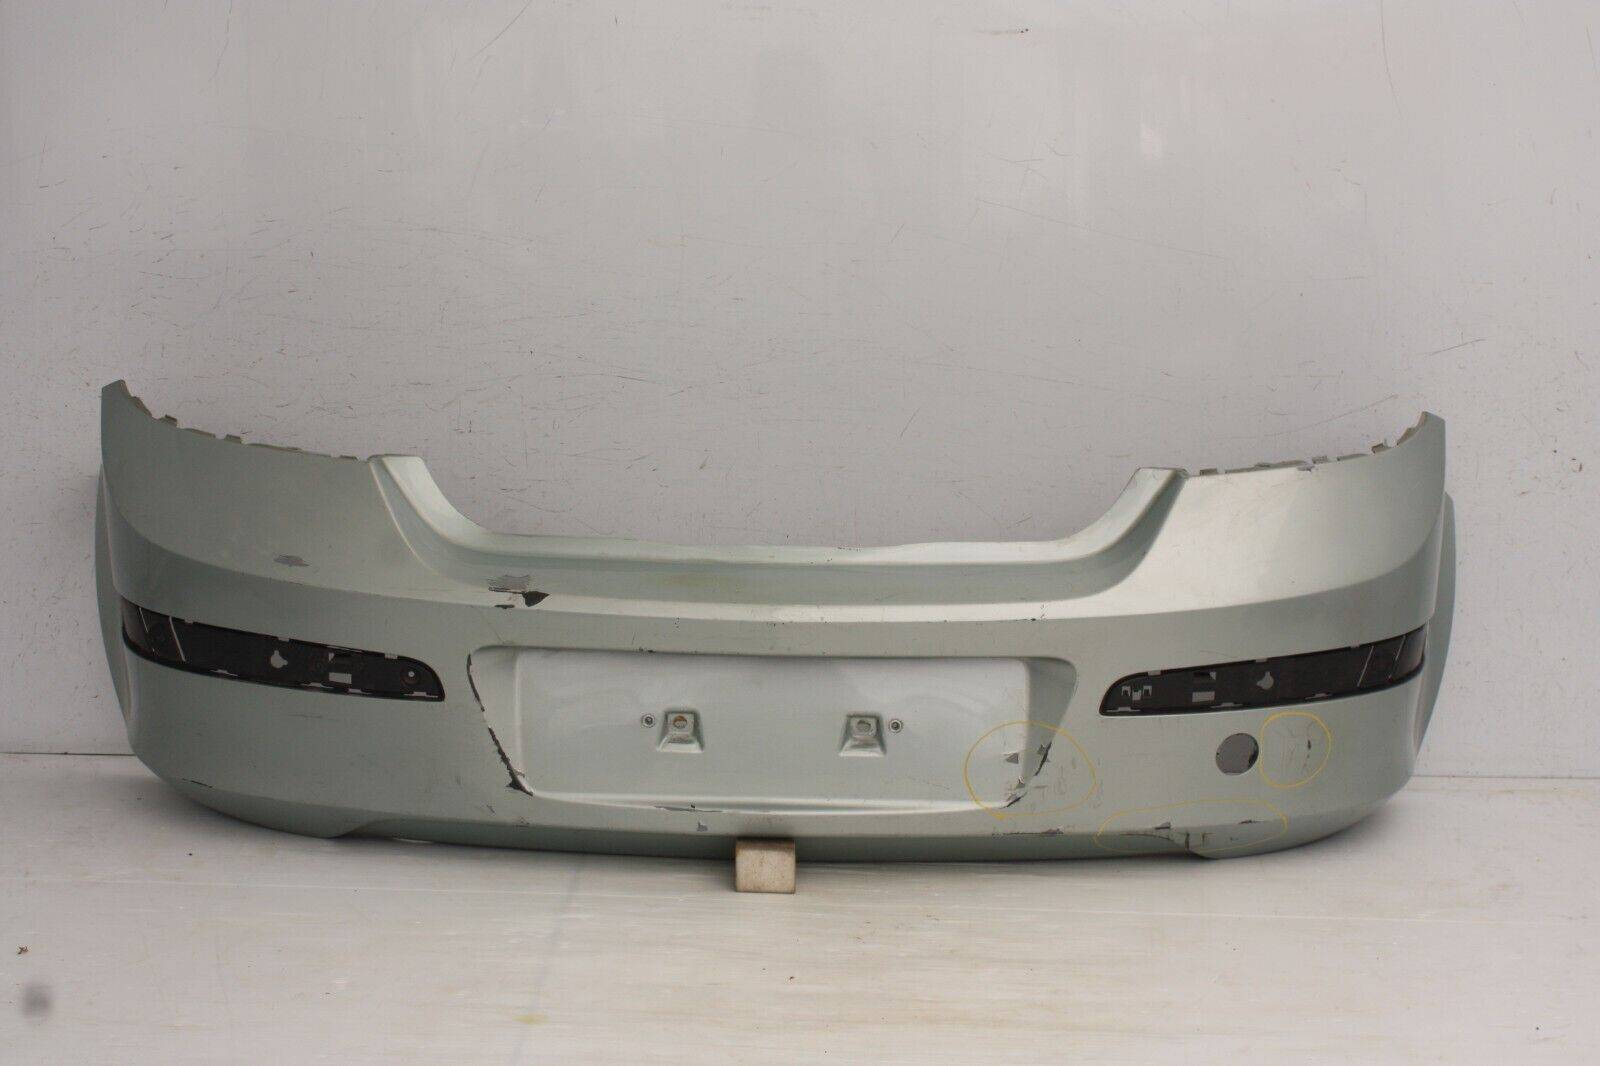 Vauxhall-Astra-H-5DR-Rear-Bumper-2004-TO-2009-24460353-Genuine-175623779959